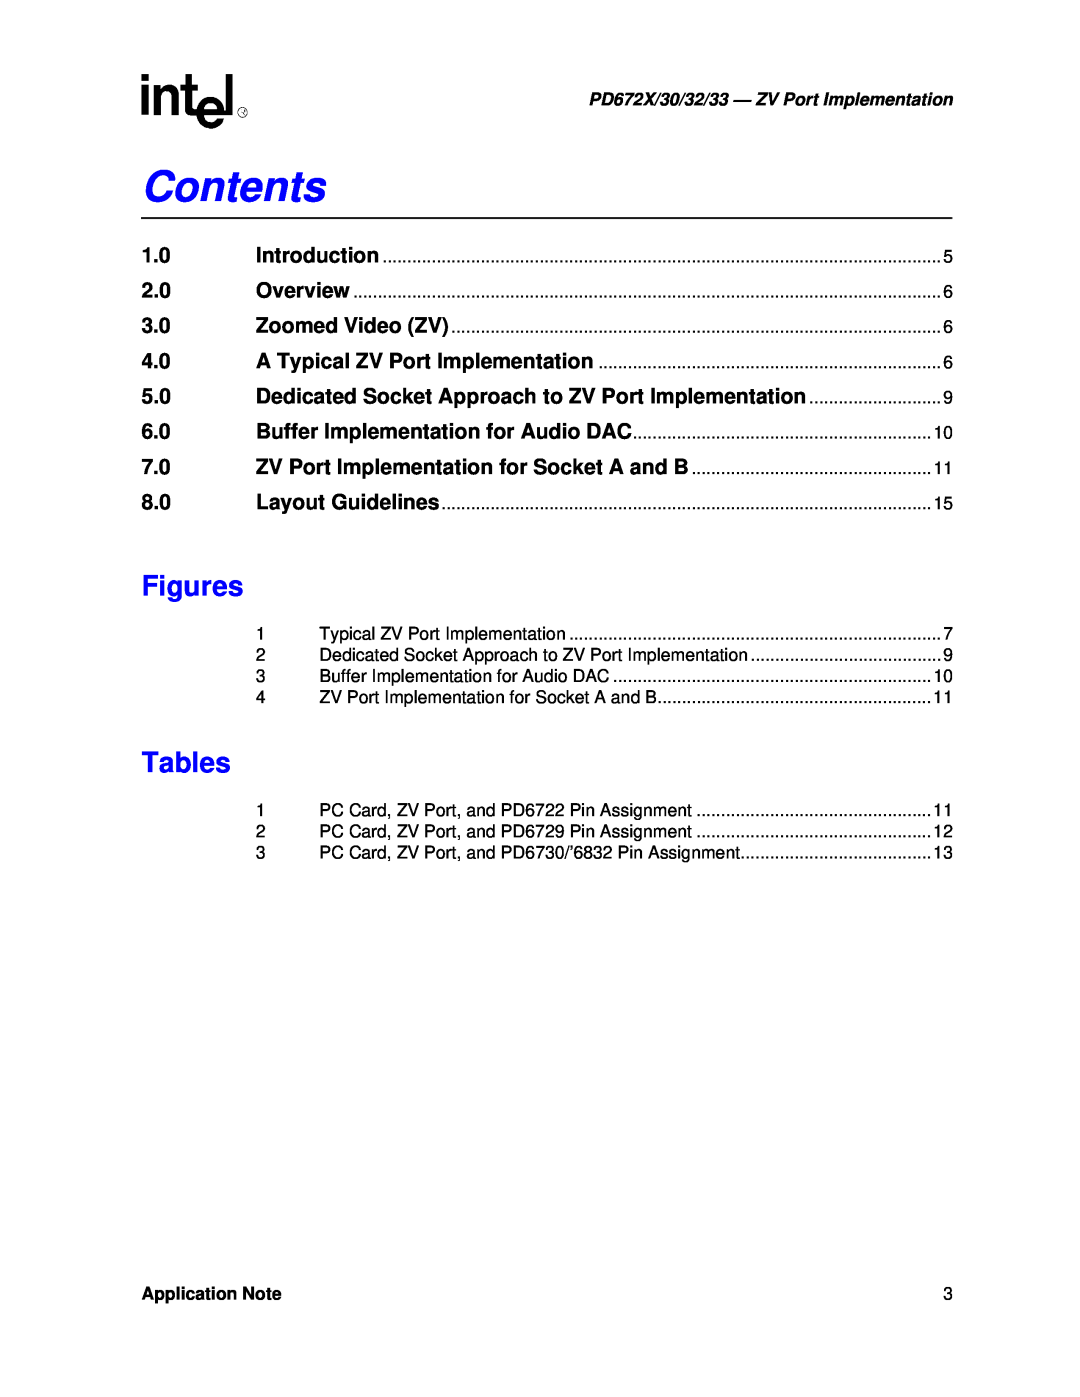 Intel manual Contents, Figures, Tables, PD672X/30/32/33 - ZV Port Implementation, Application Note 